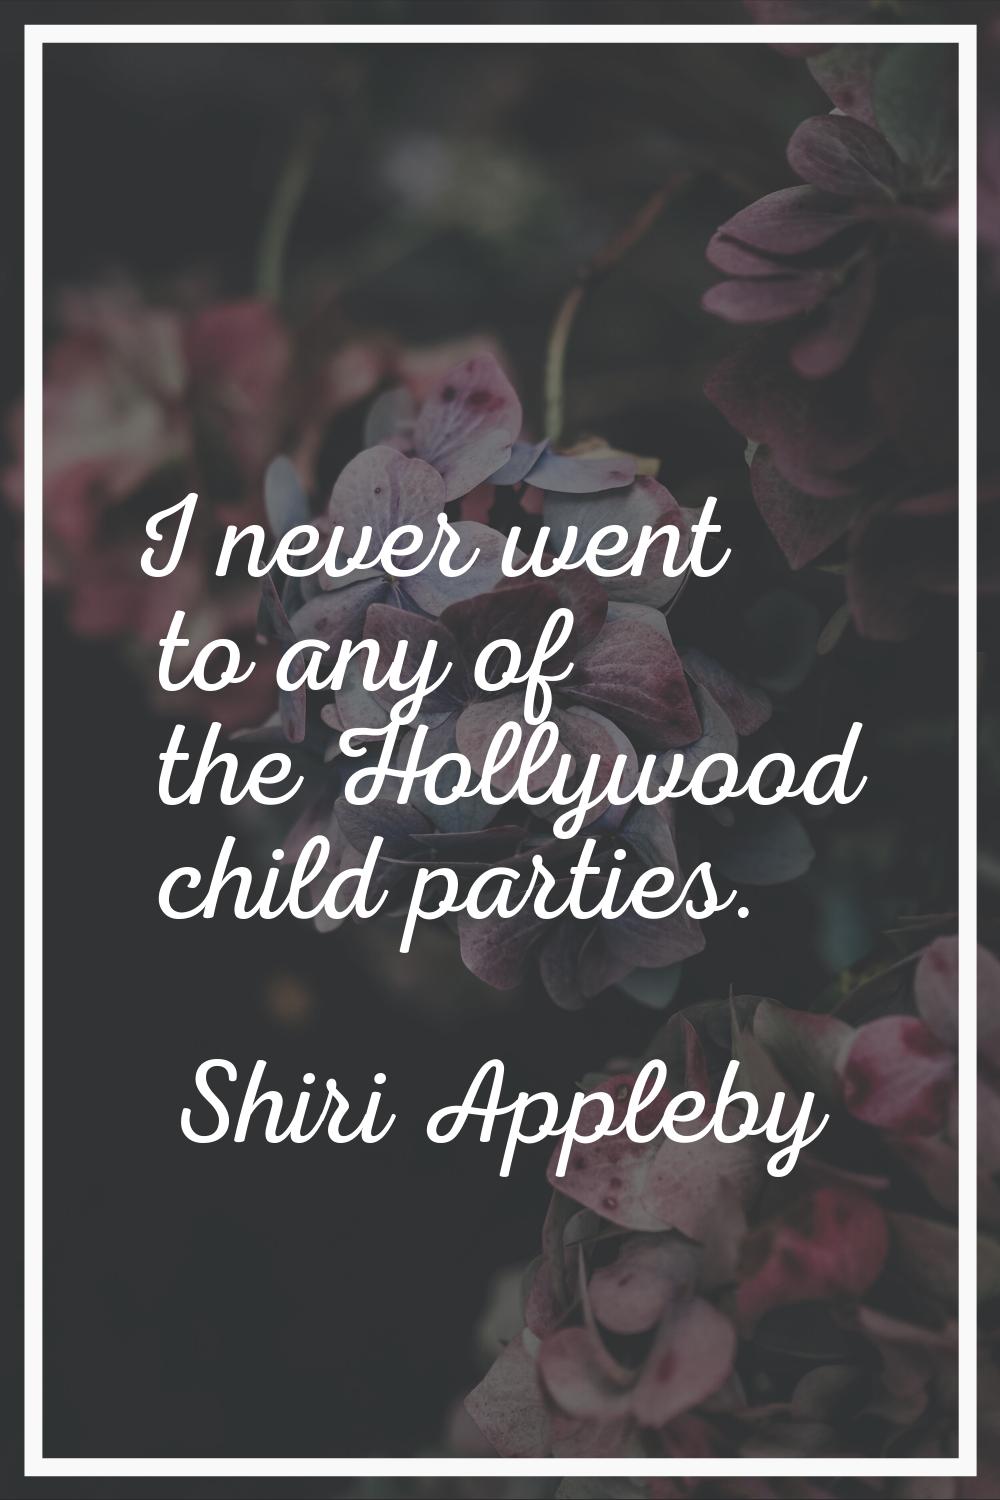 I never went to any of the Hollywood child parties.